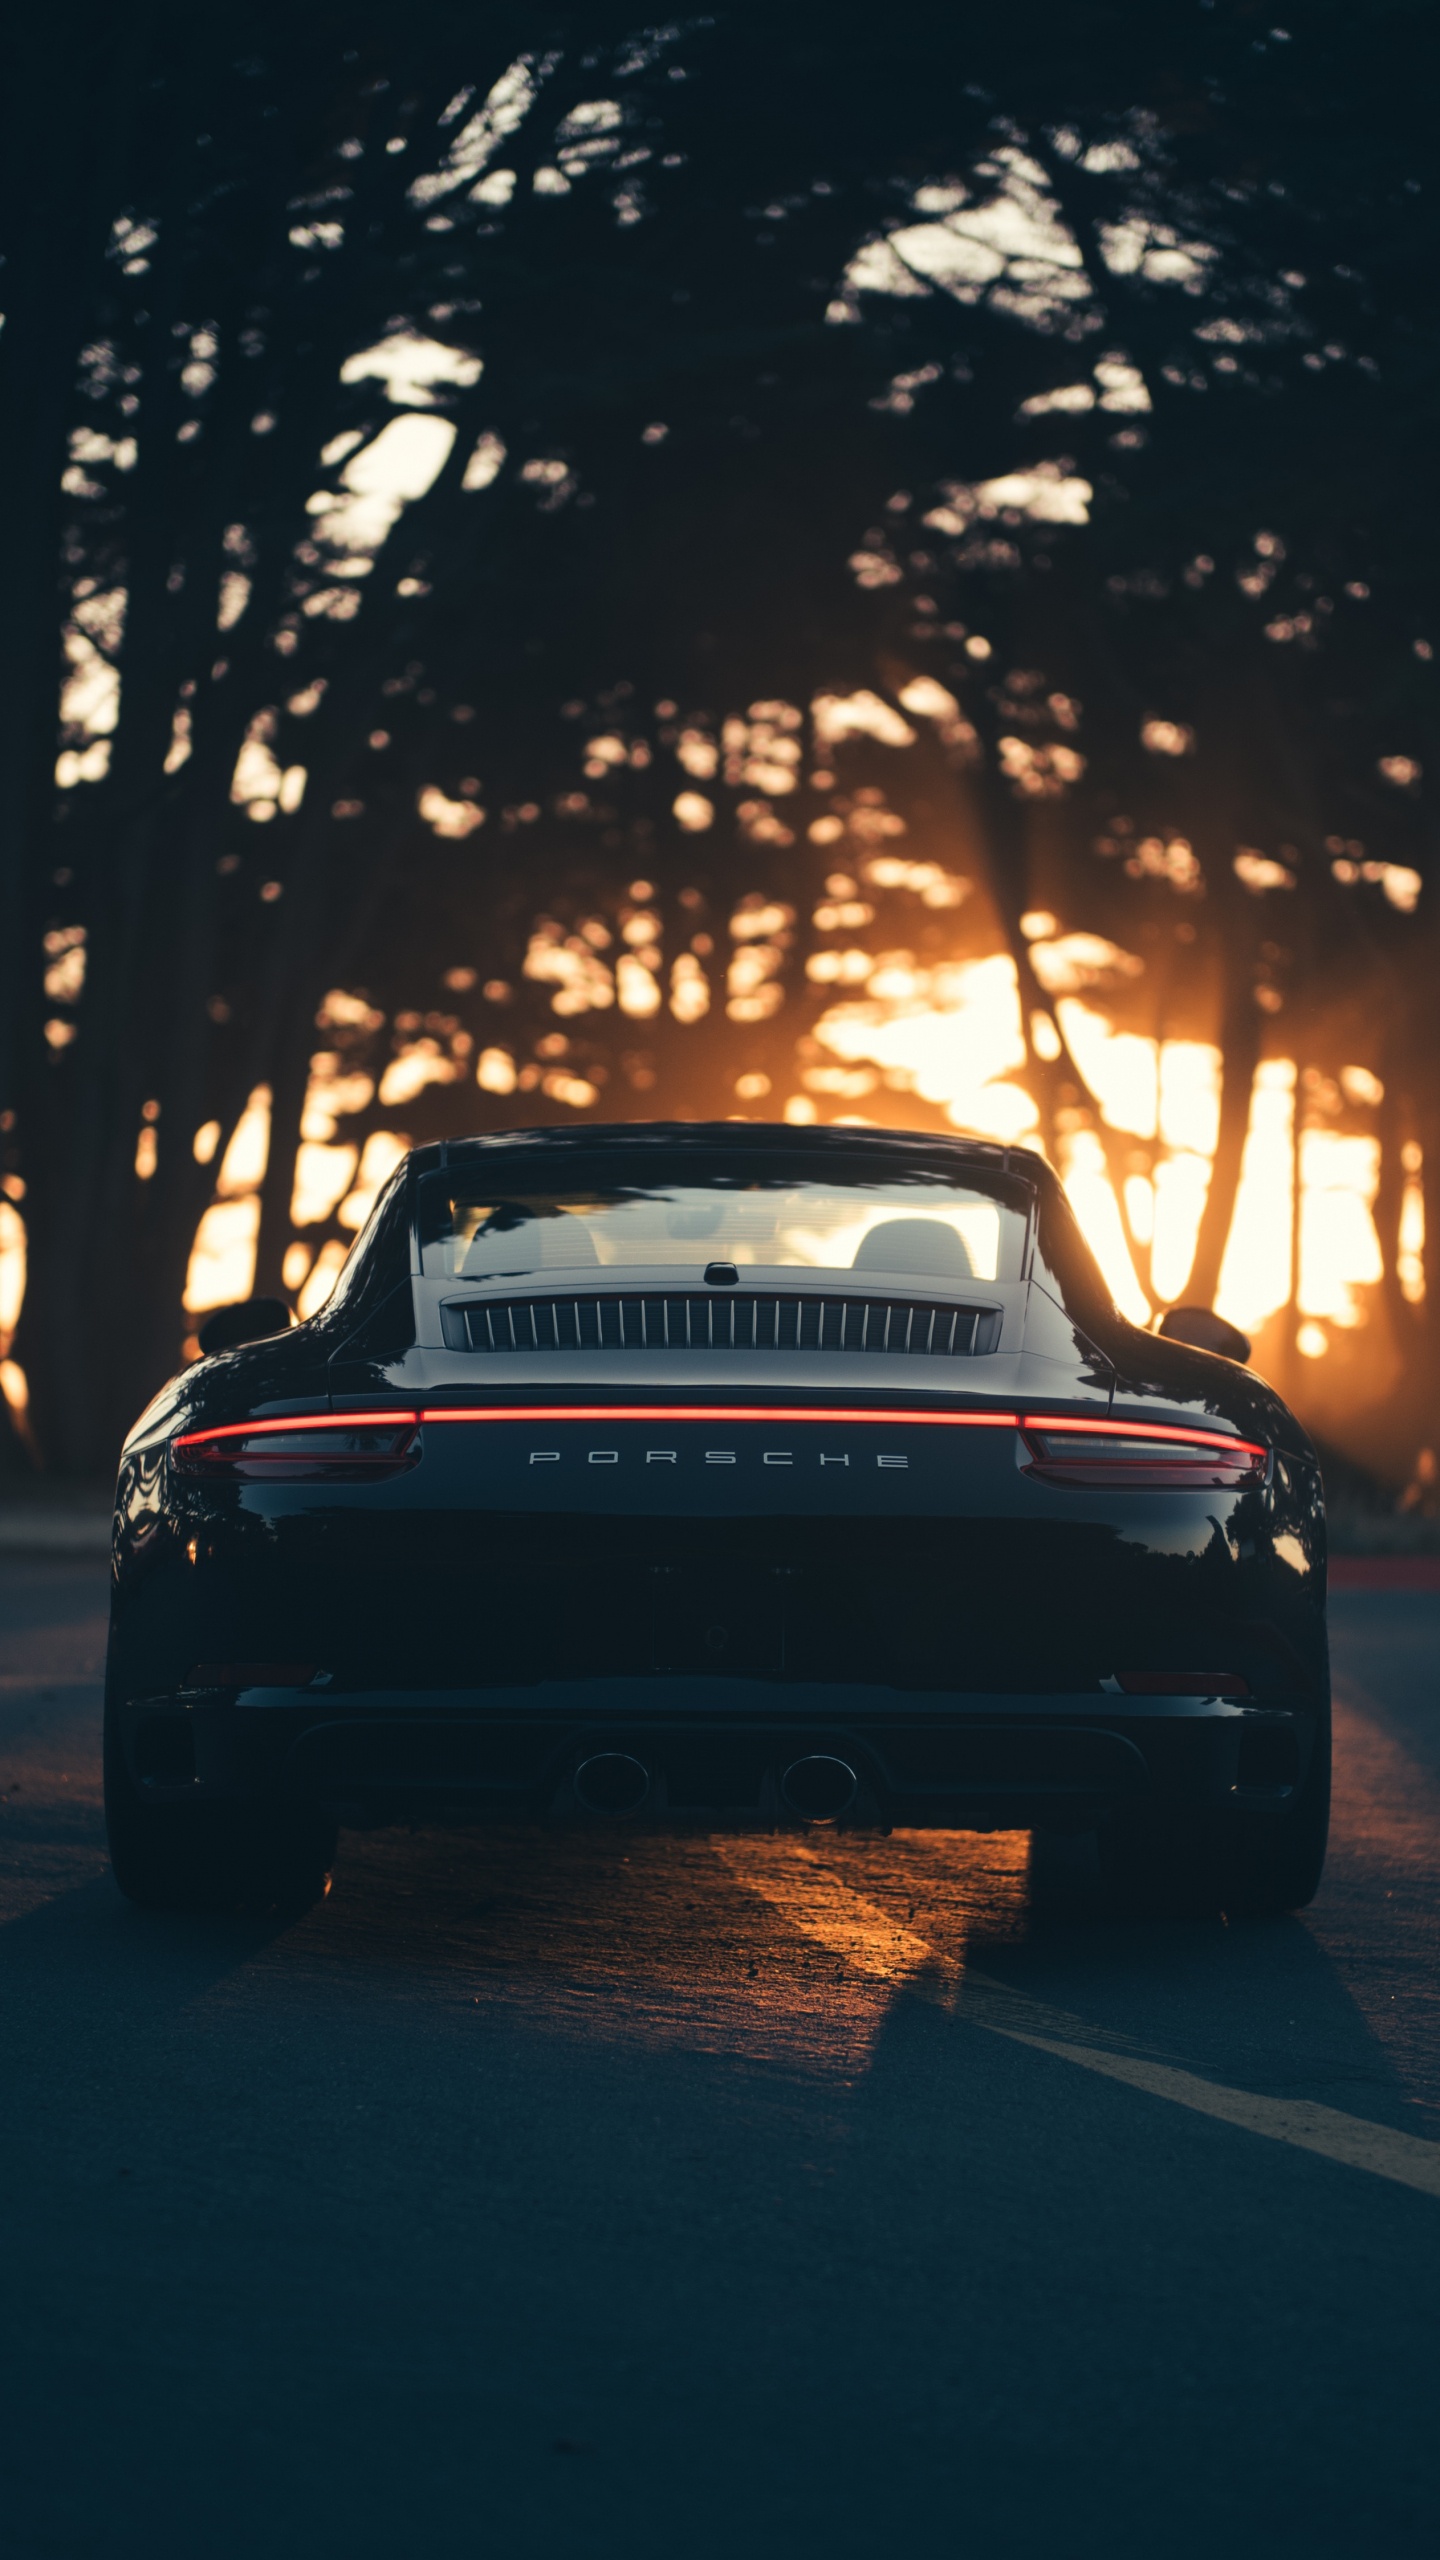 Black Car on Road During Sunset. Wallpaper in 1440x2560 Resolution